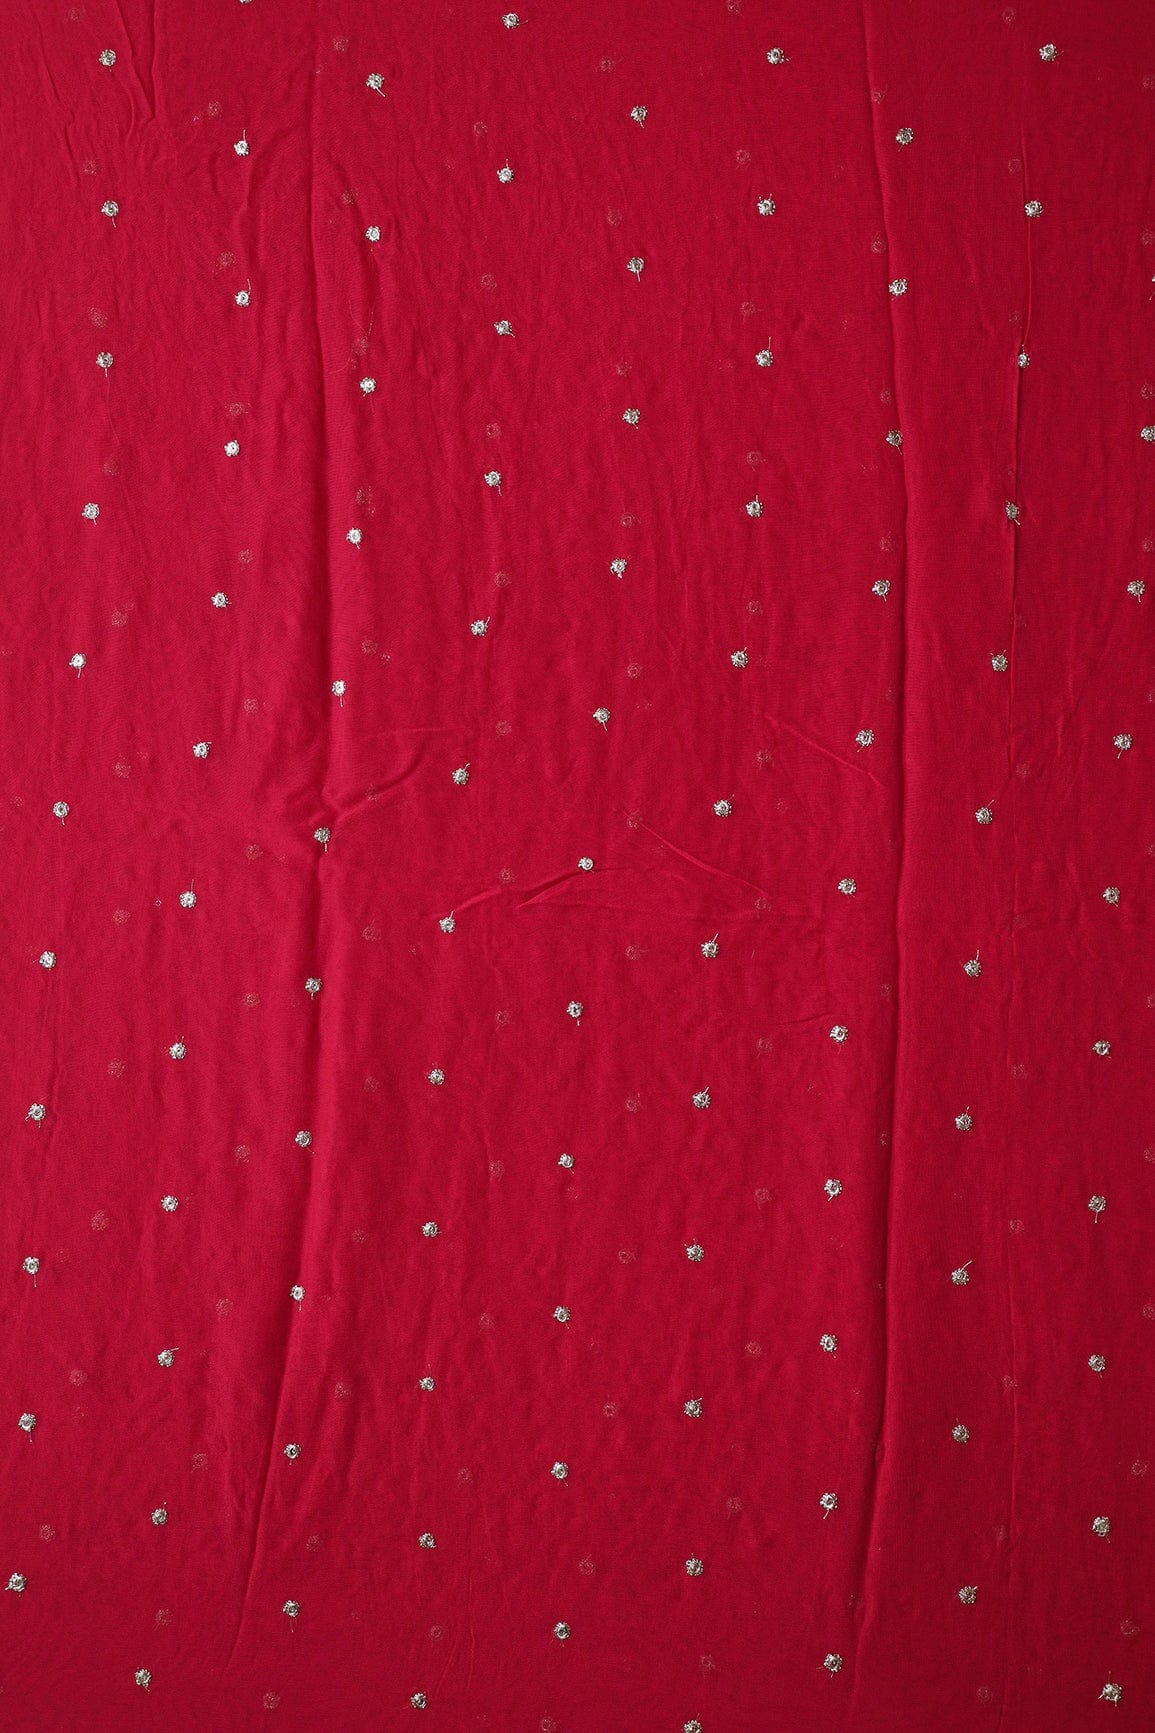 doeraa Embroidery Fabrics 3.75 Meter Cut Piece Of Zari With Thread Small Floral Motif Embroidery On Red Viscose Georgette Fabric